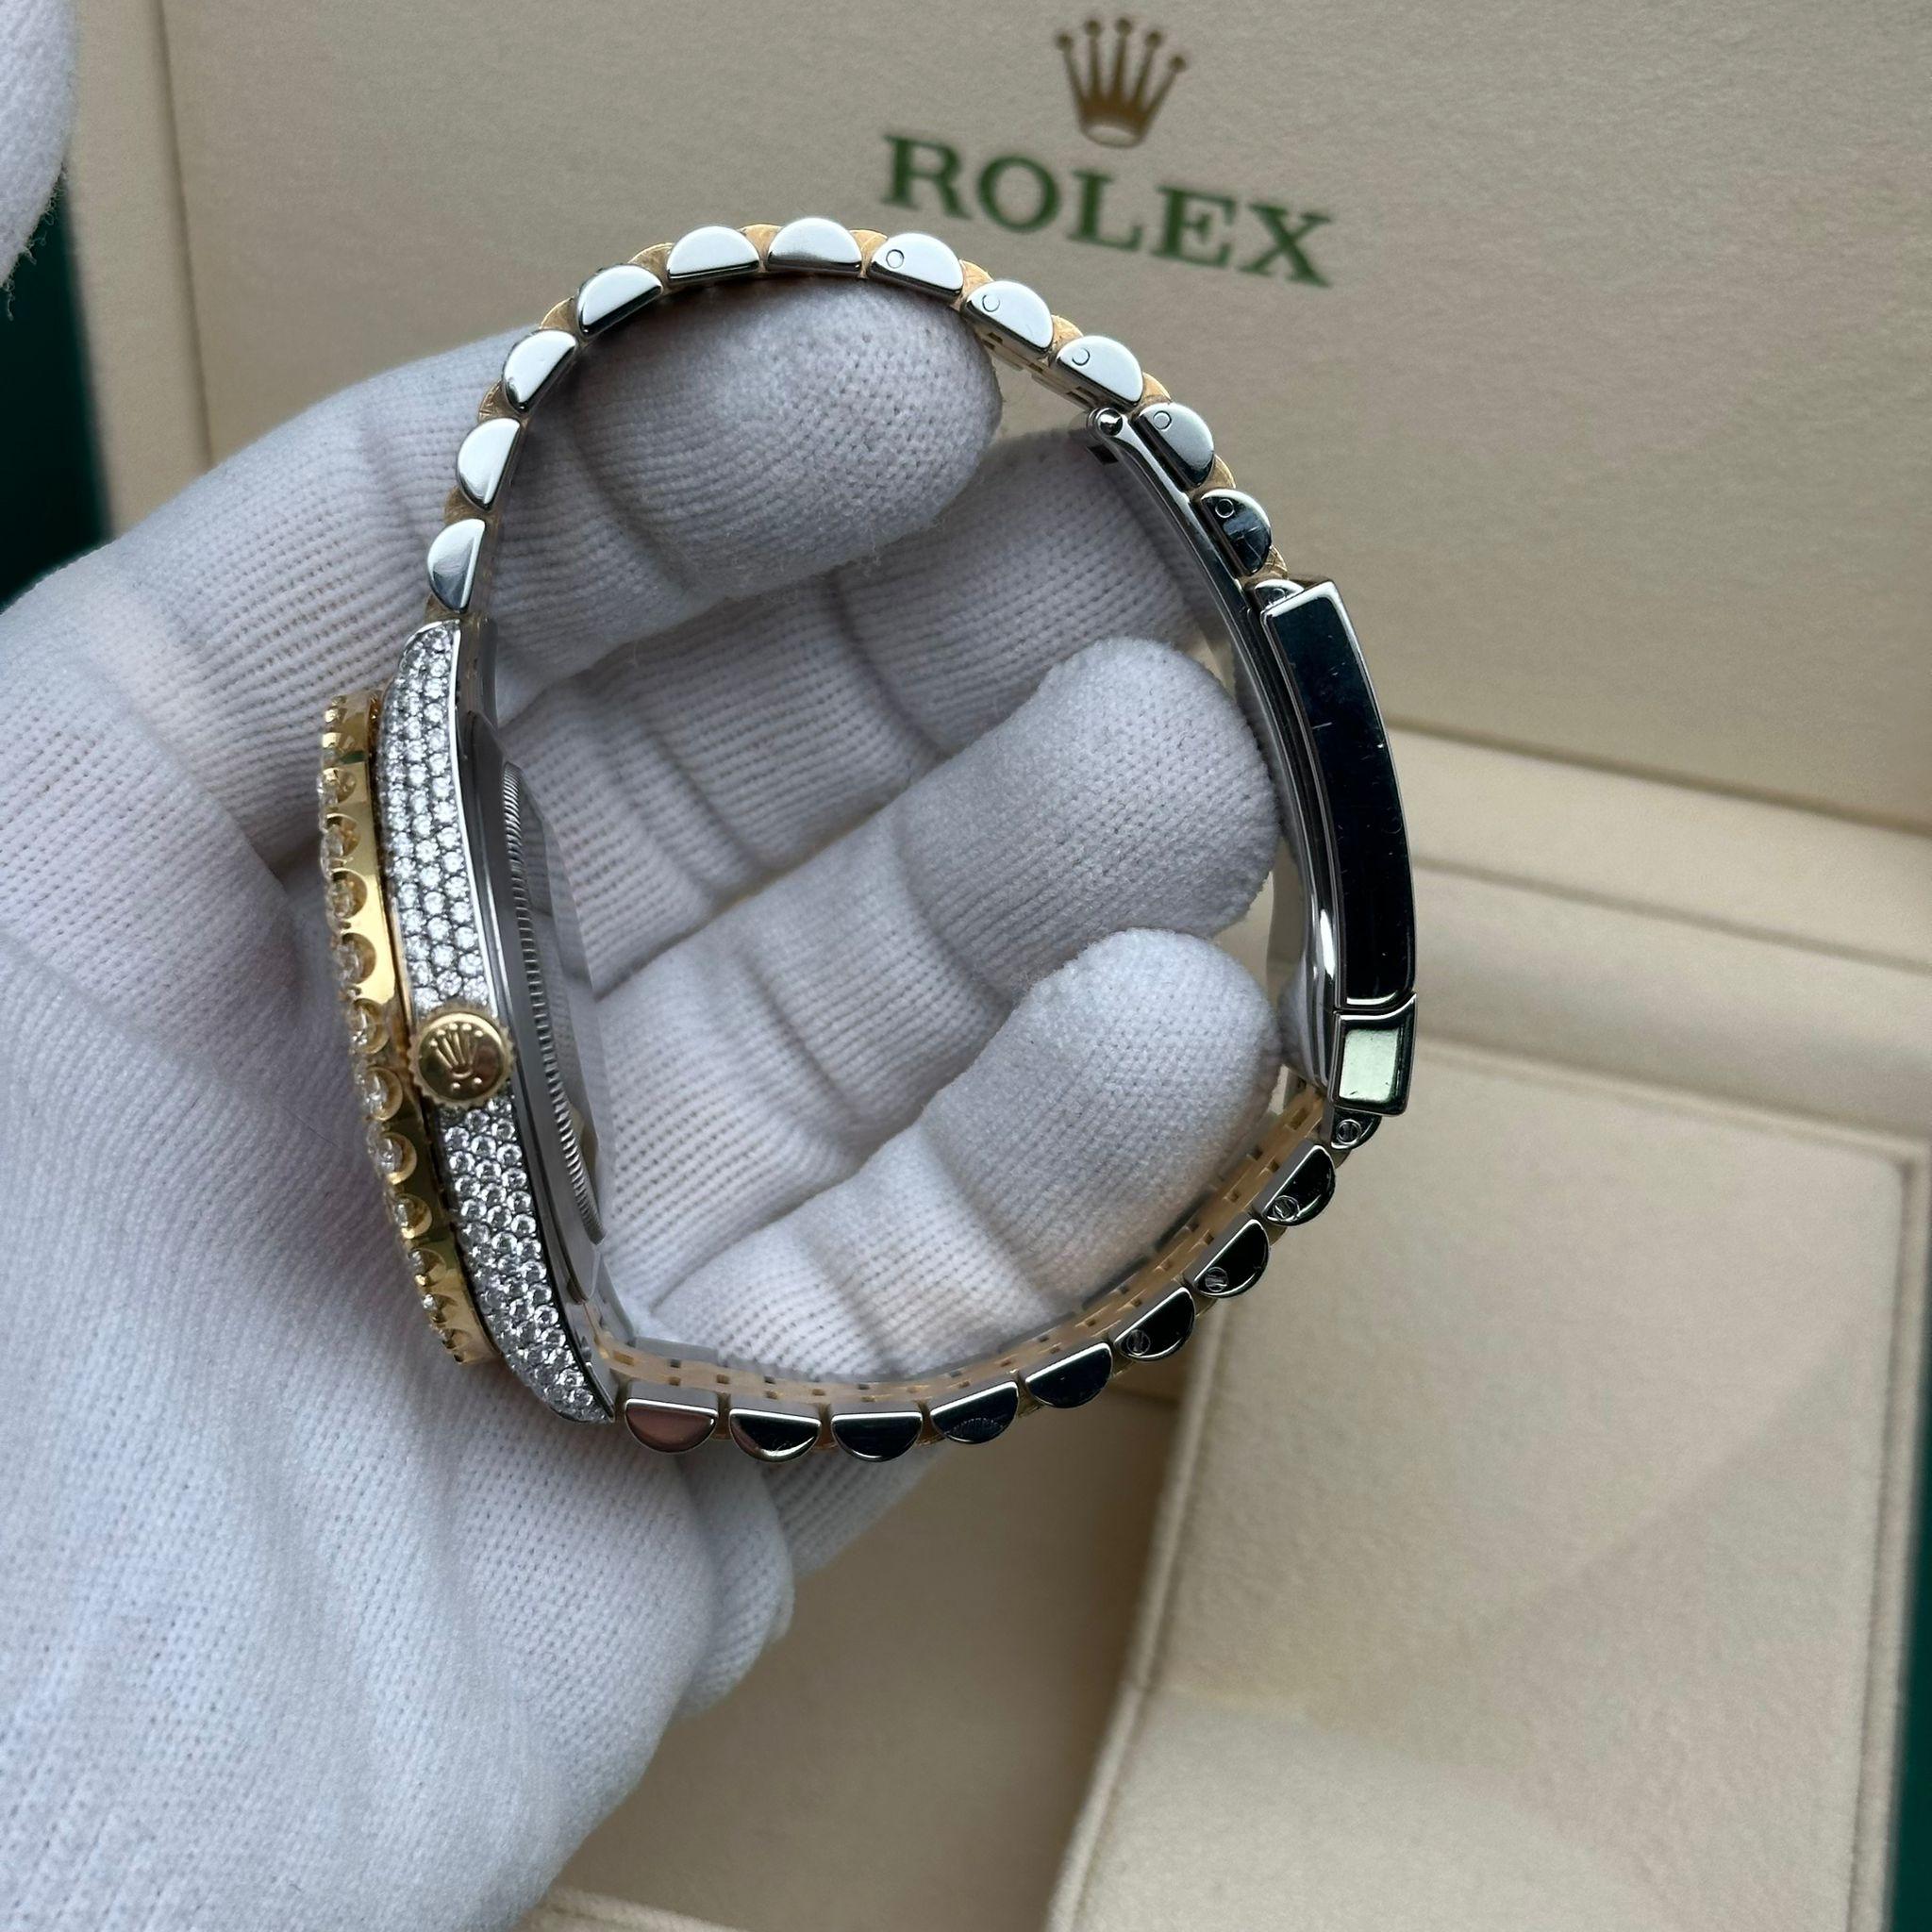 Rolex Datejust 41 18K Gold SteelCustom Fully Iced Out Jubilee Watch 126333 For Sale 3